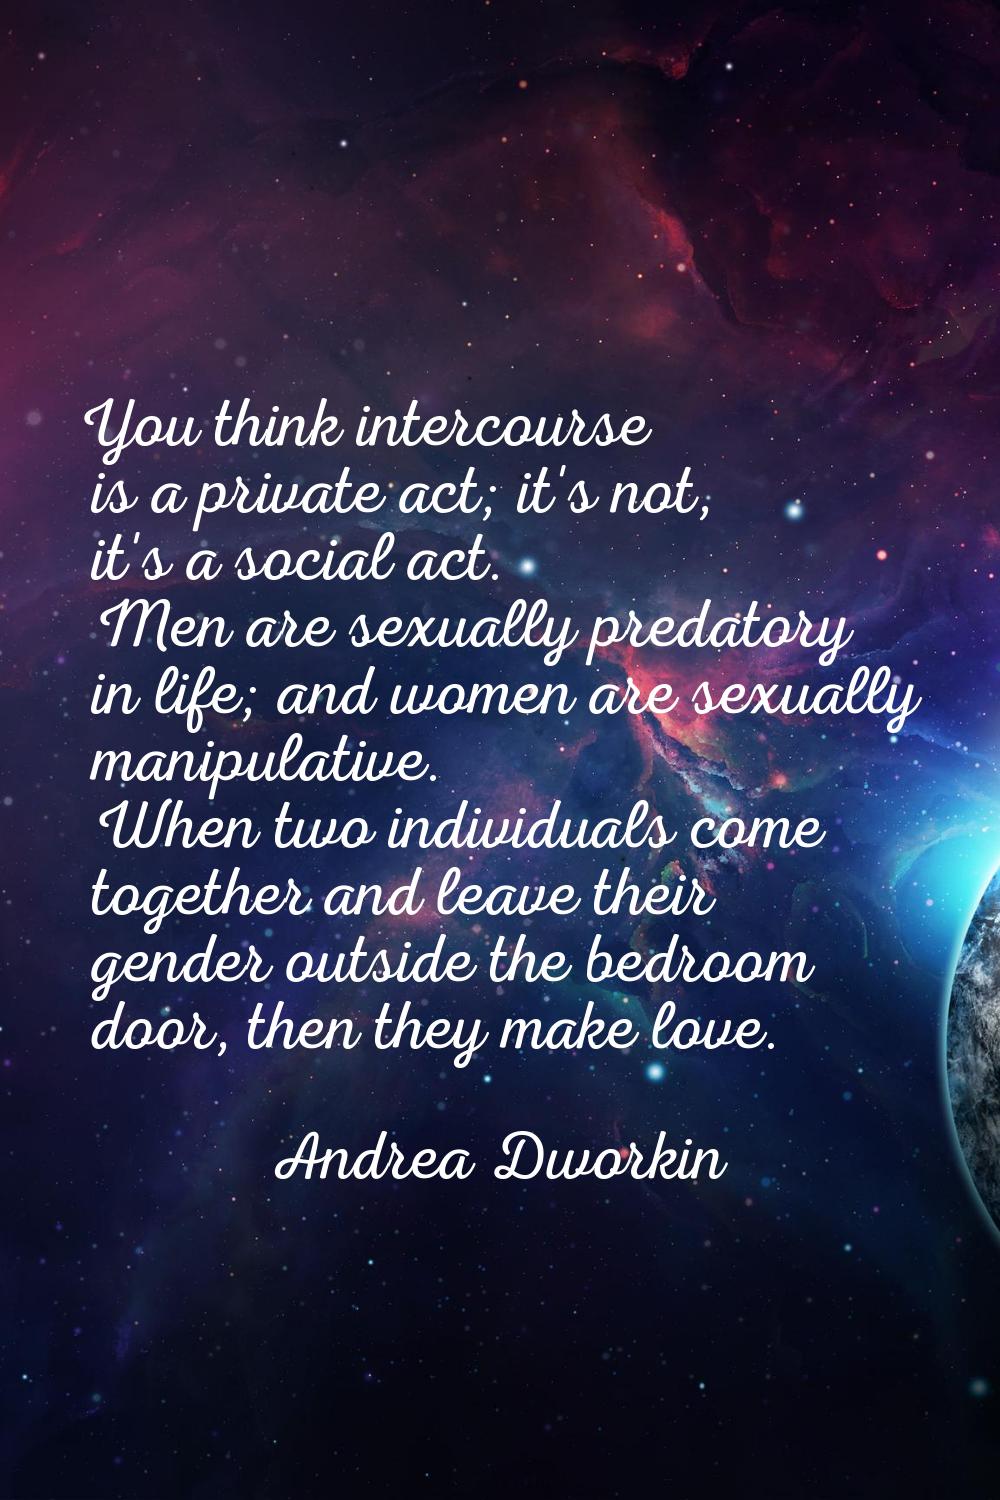 You think intercourse is a private act; it's not, it's a social act. Men are sexually predatory in 